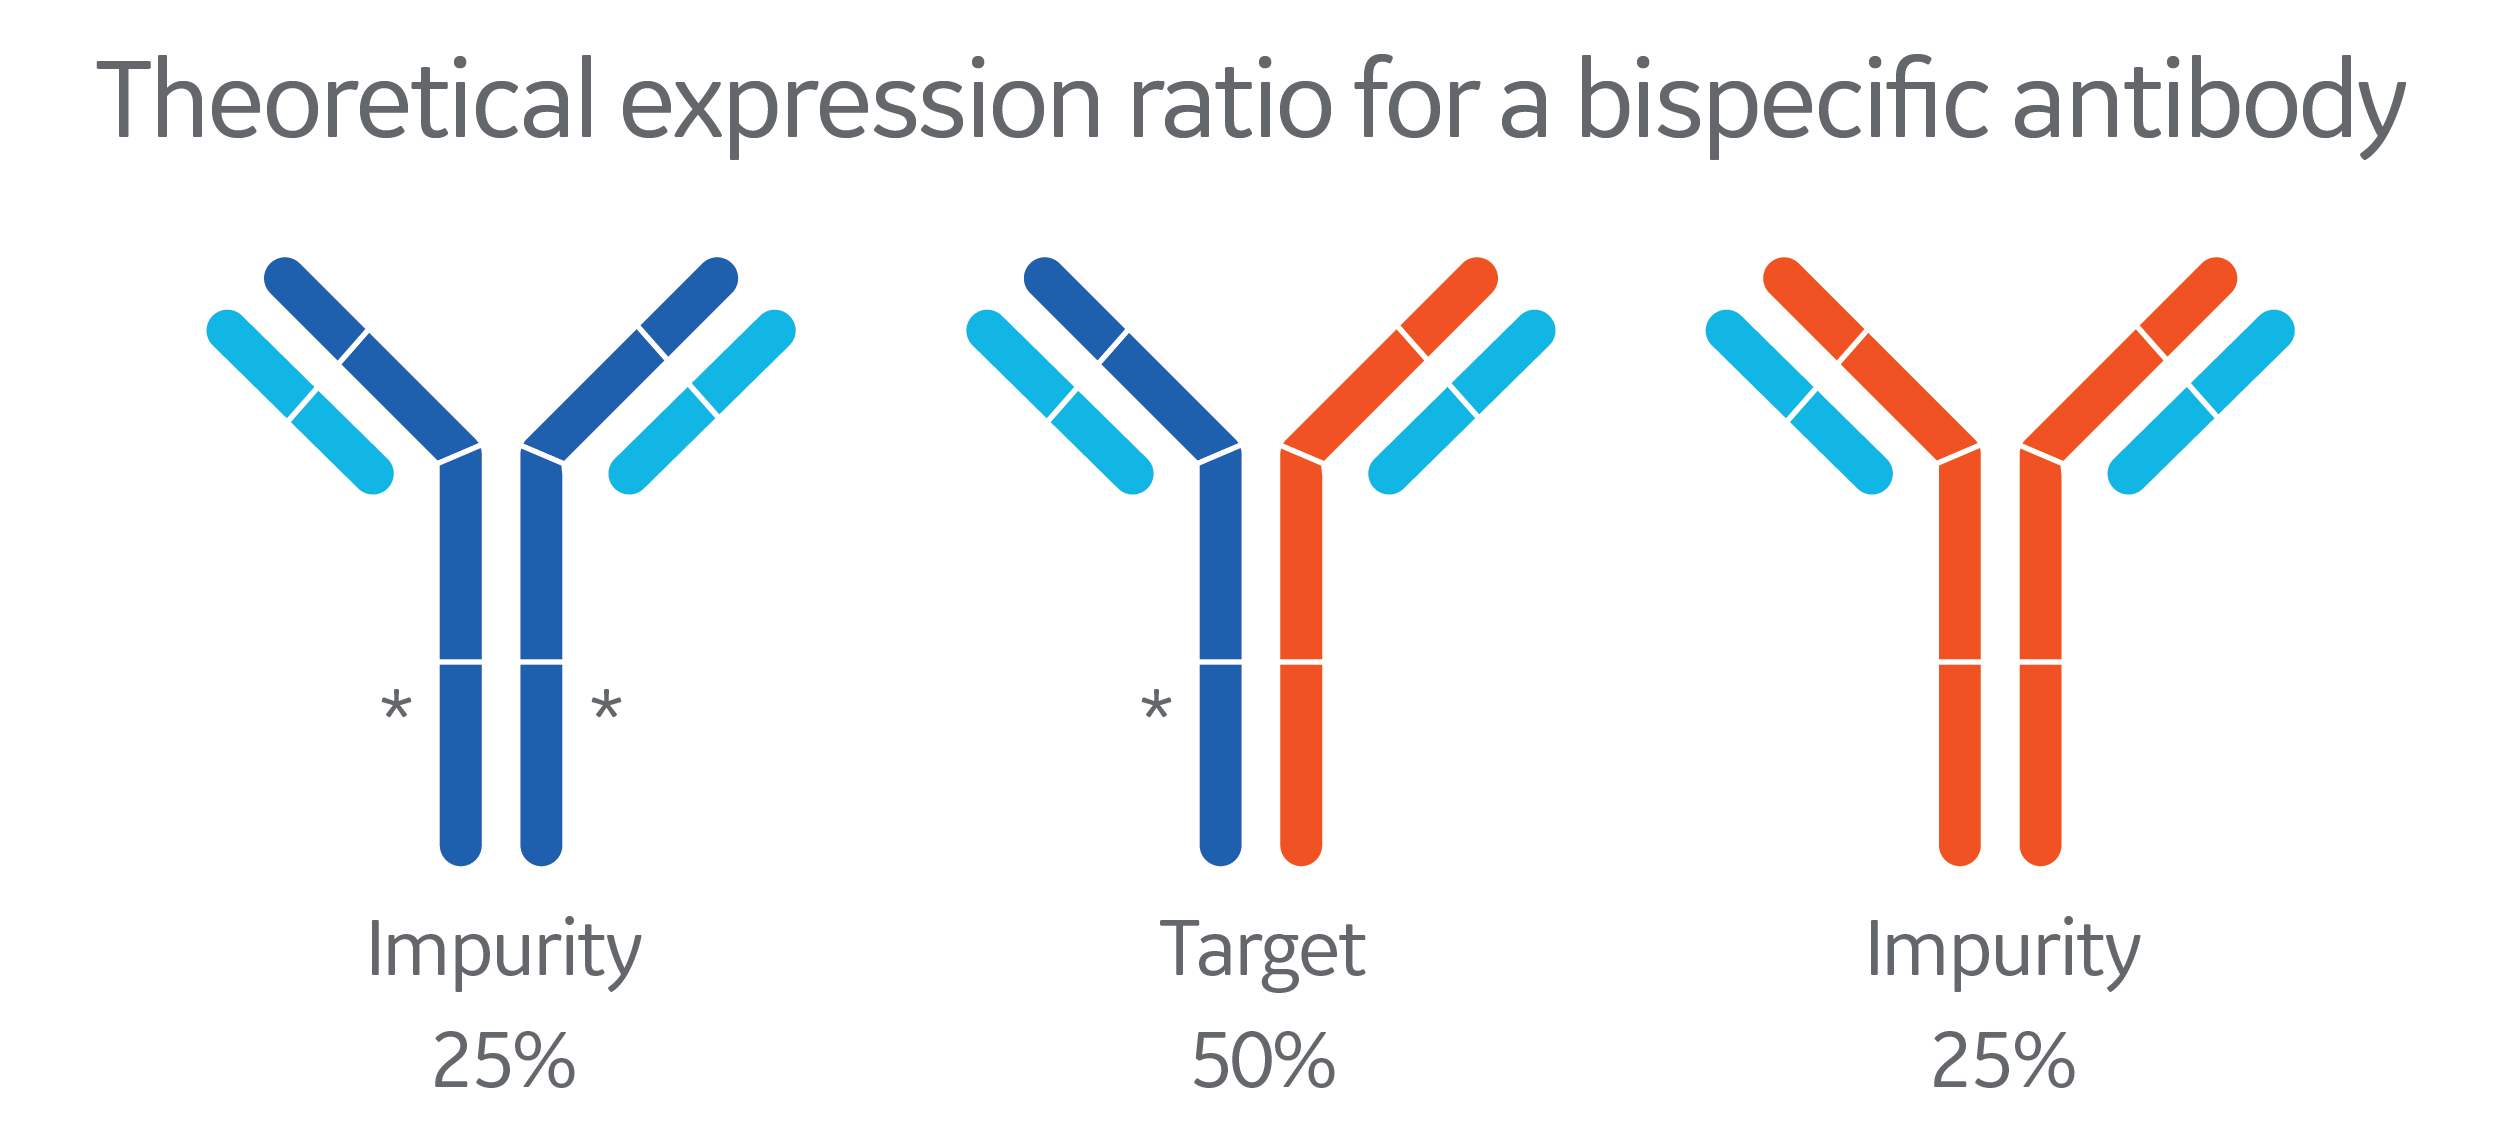 Diagram of the theoretical expression ration for a bispecific antibody